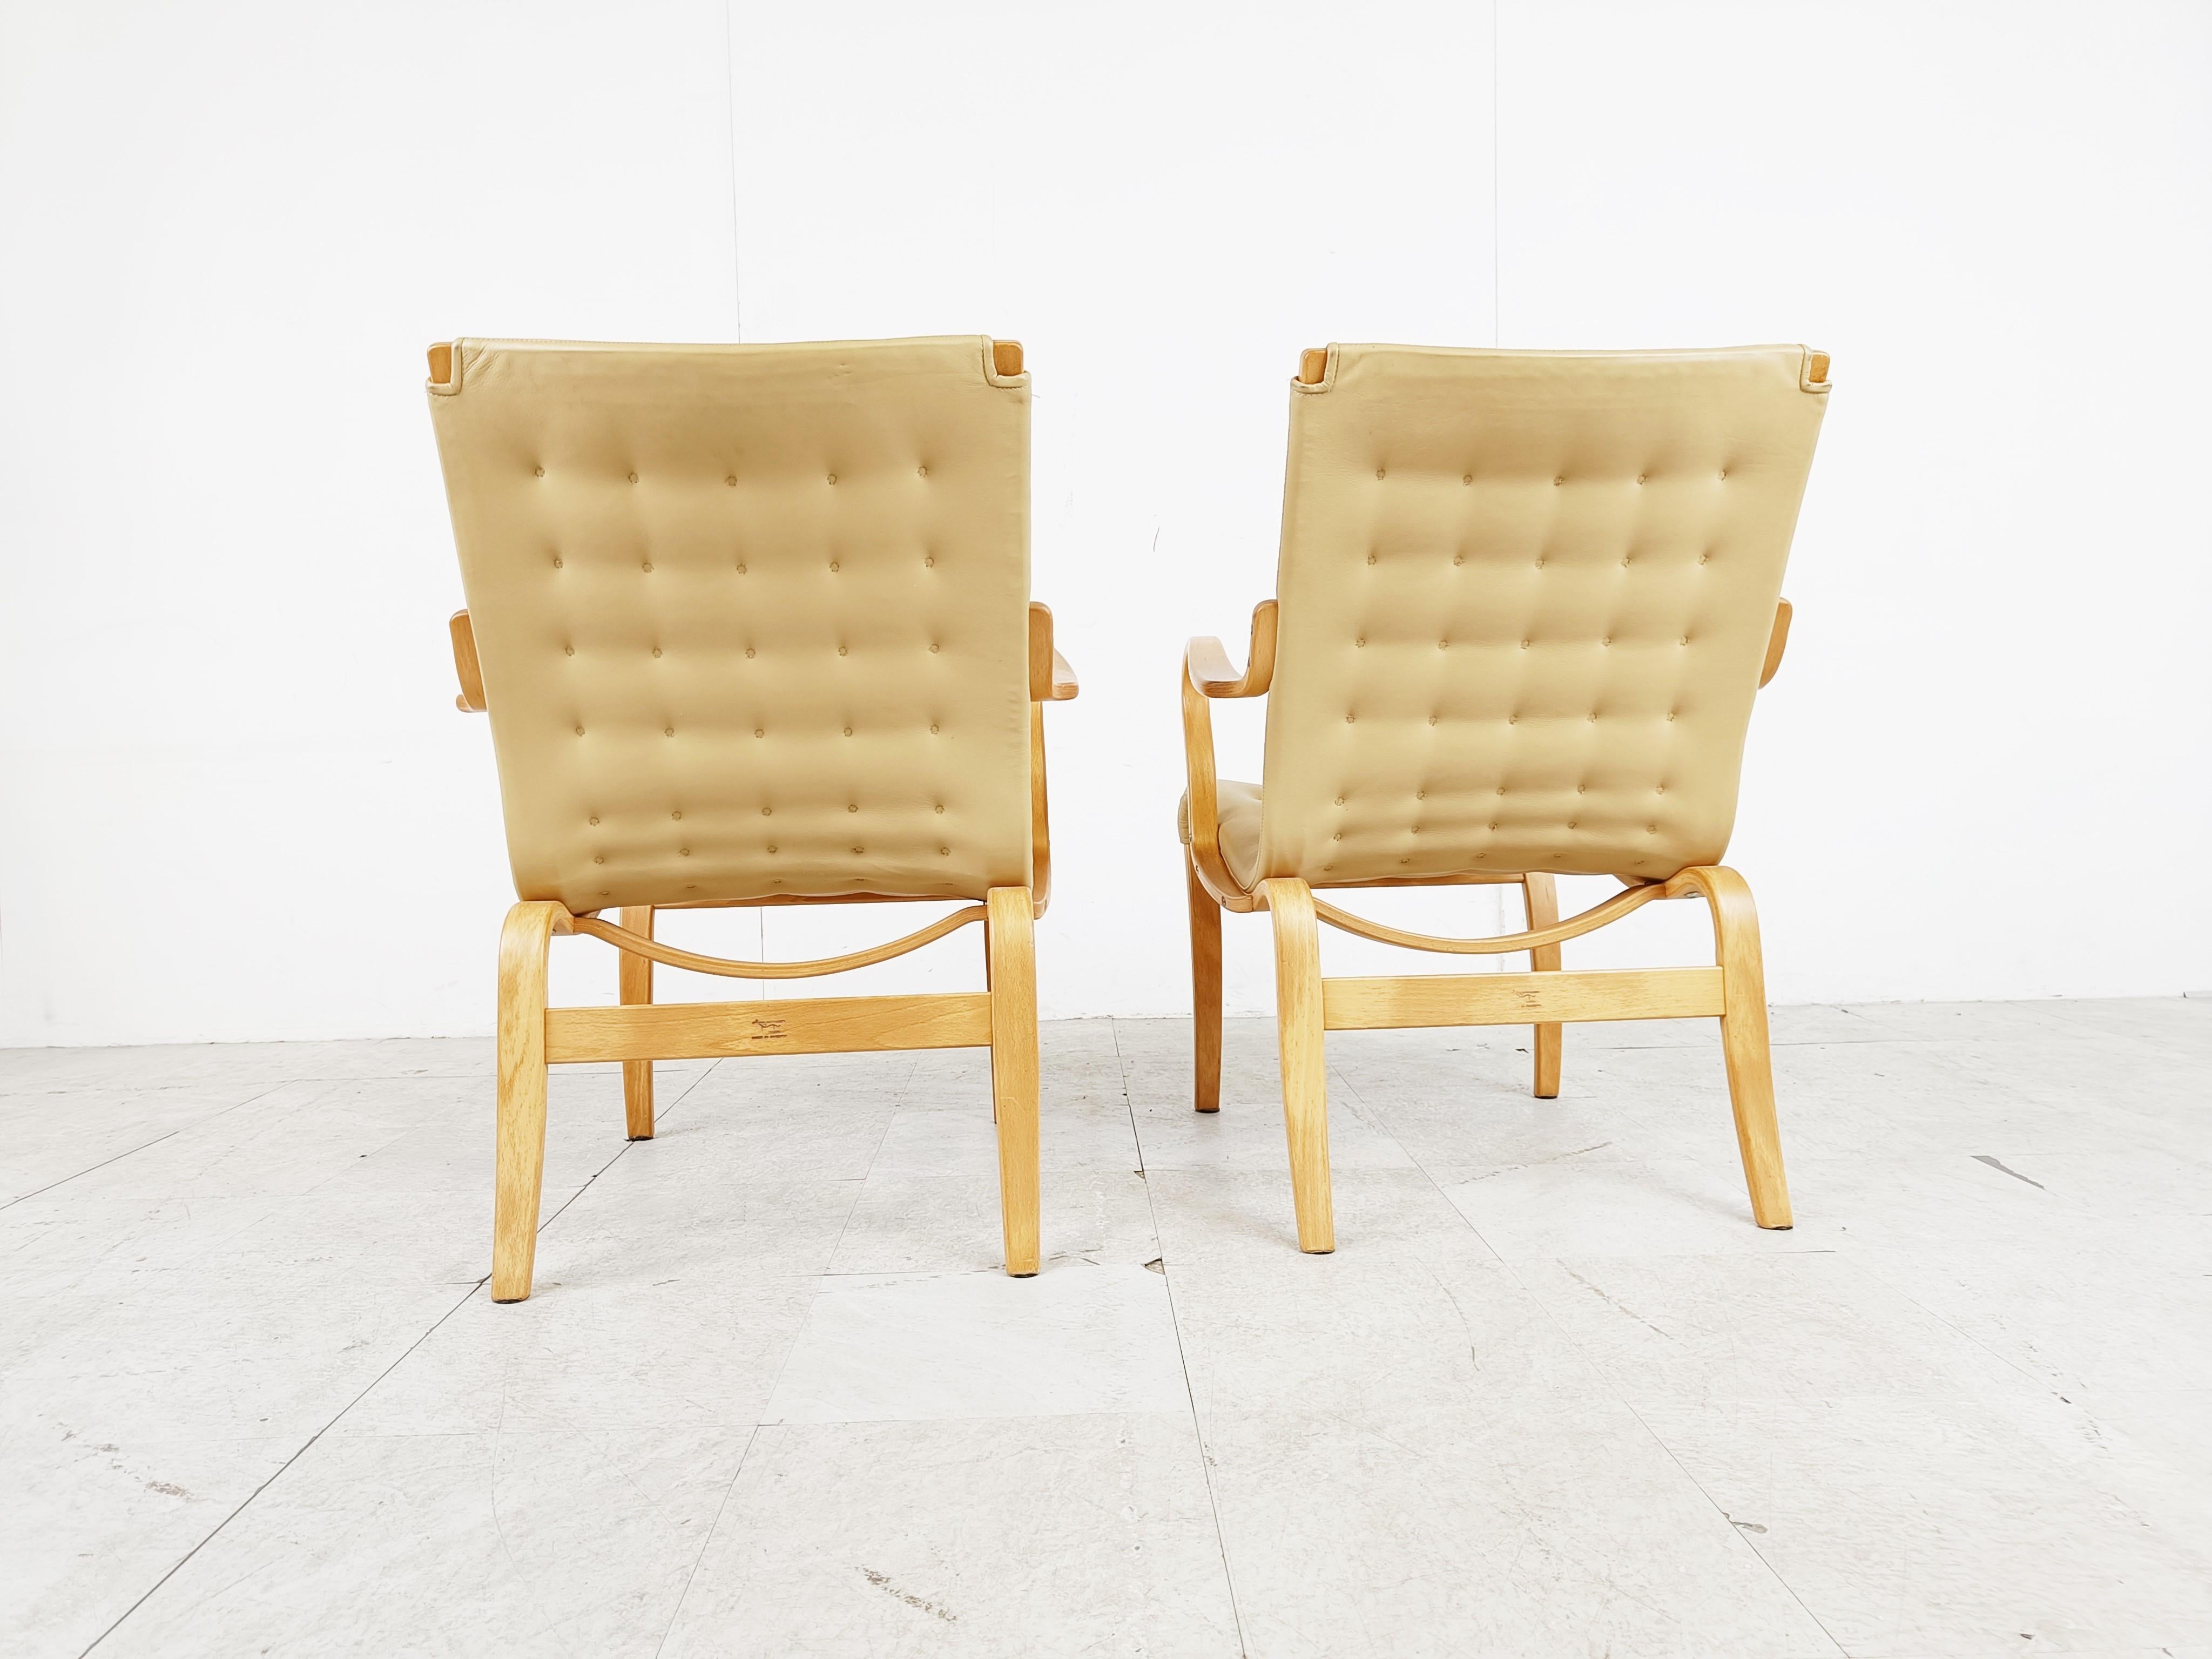 Swedish Pair of Mina Armchairs by Bruno Mathsson, 1960s For Sale